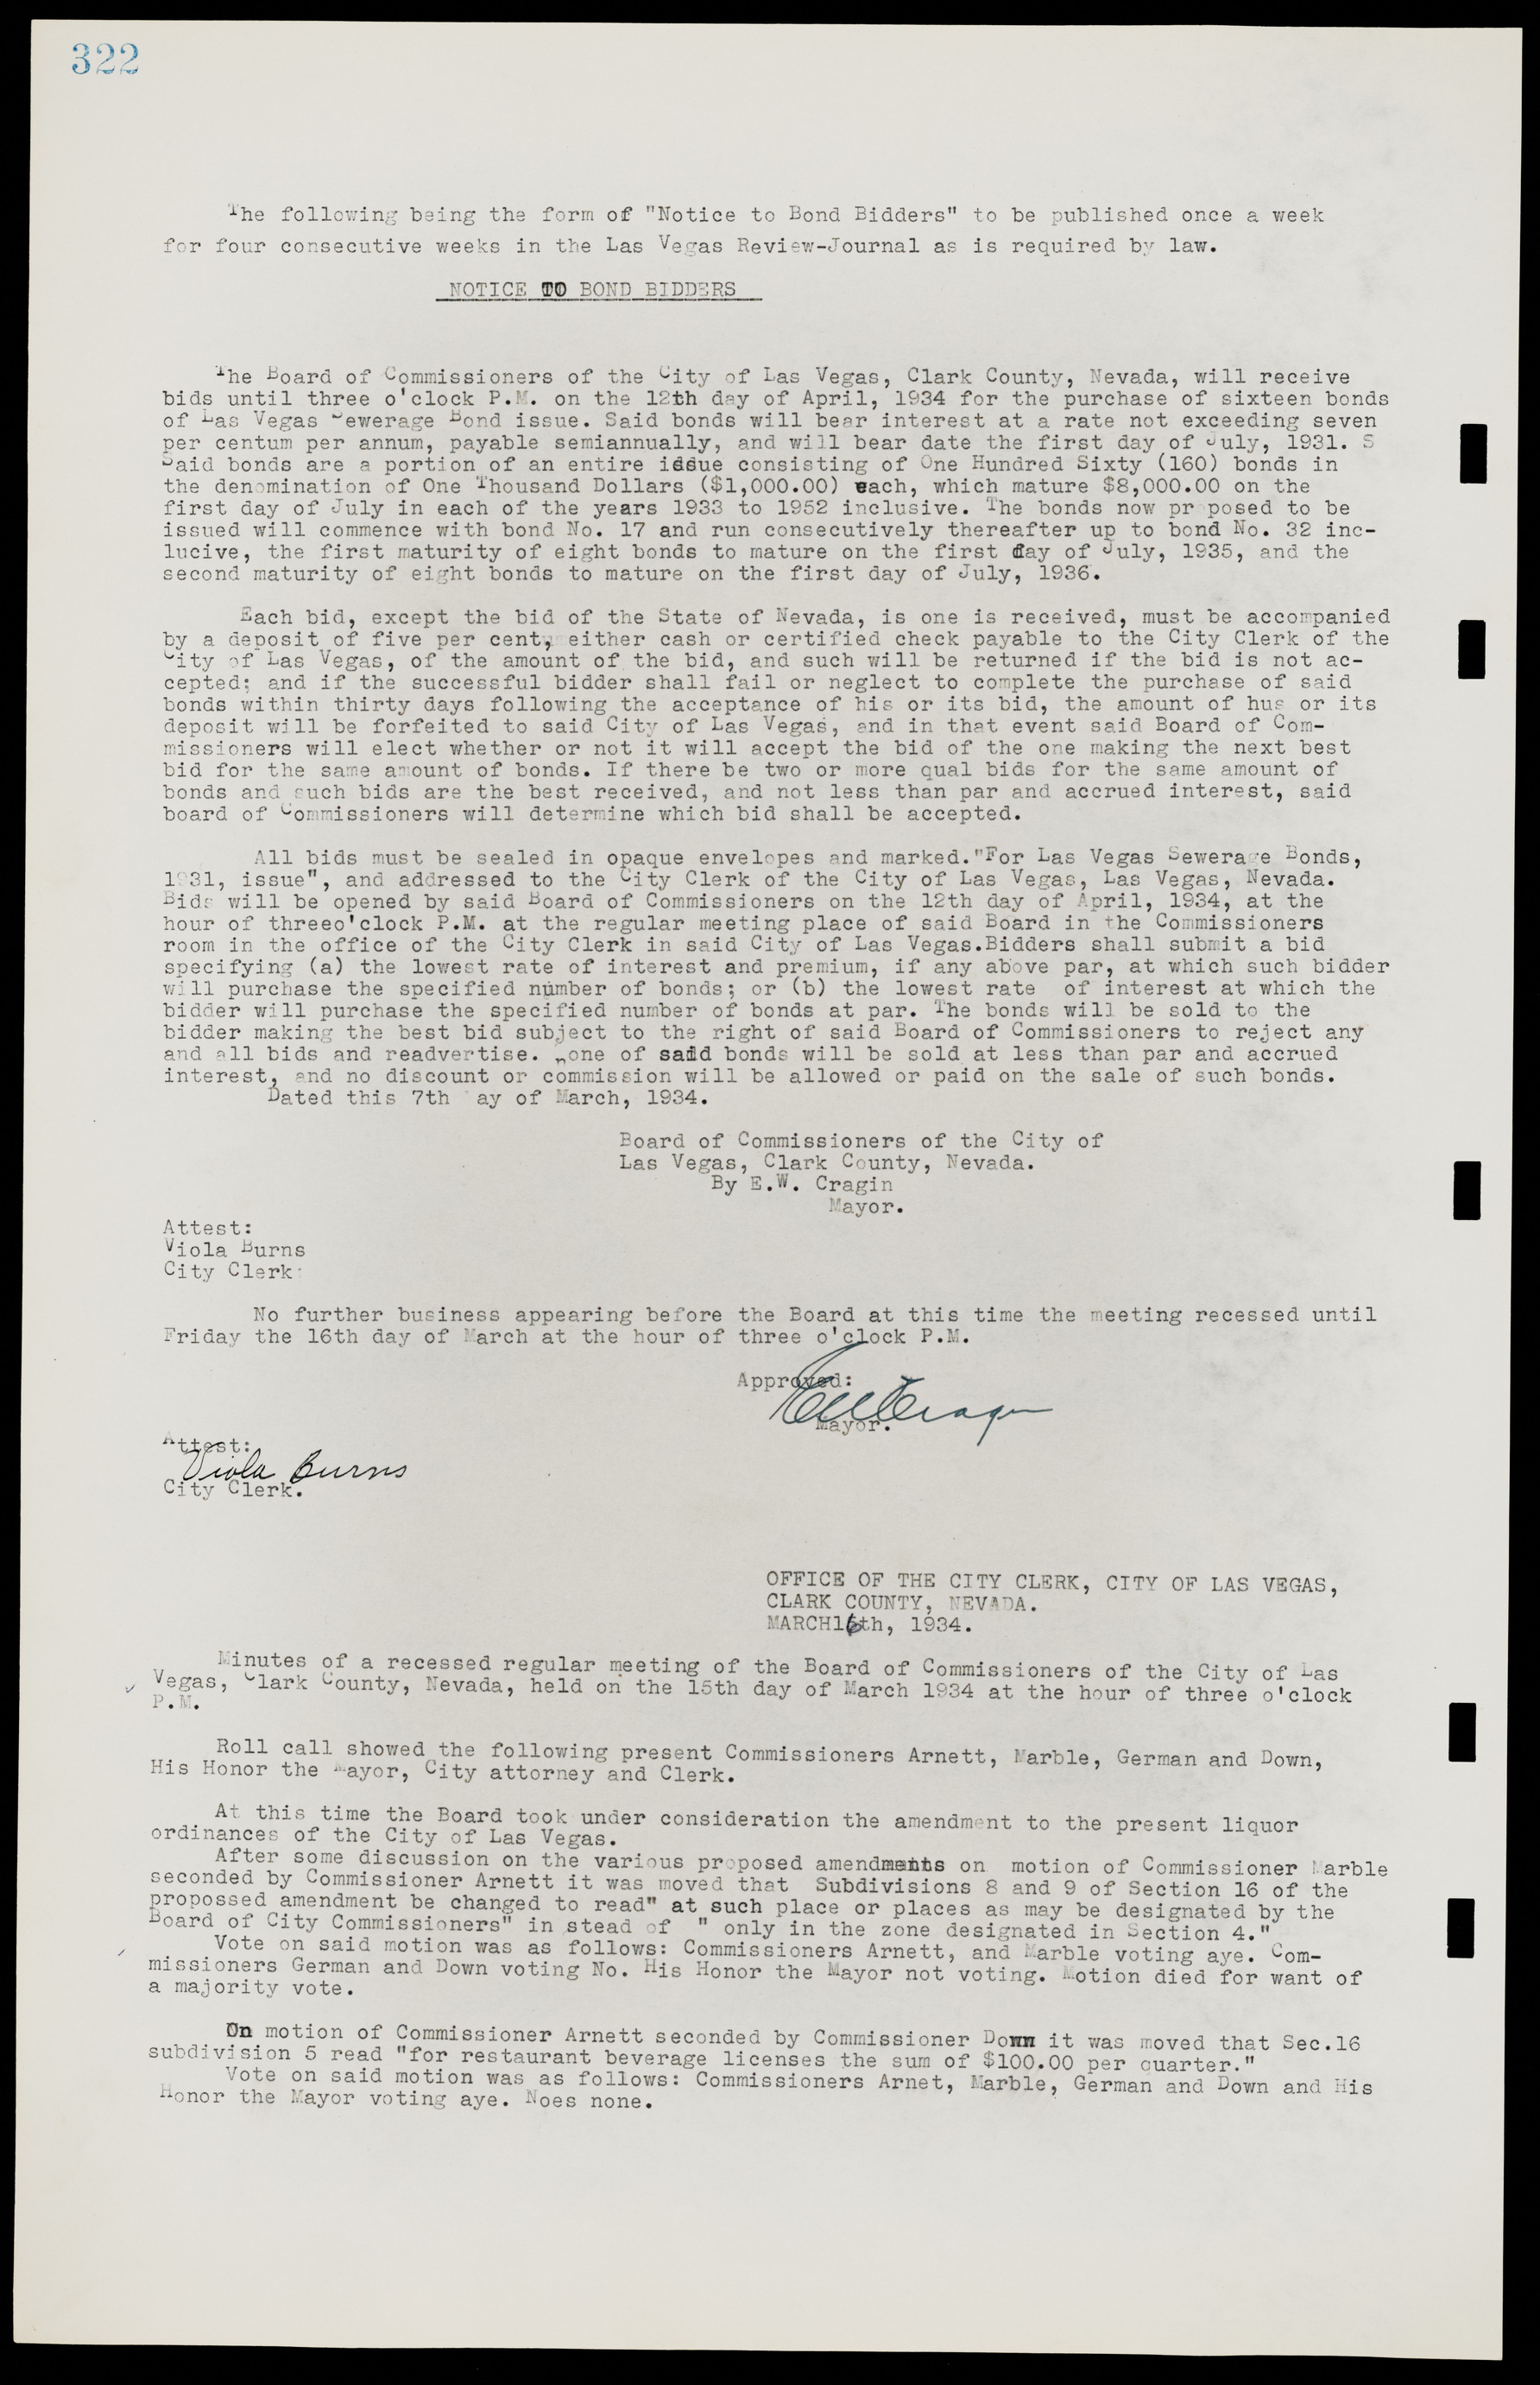 Las Vegas City Commission Minutes, May 14, 1929 to February 11, 1937, lvc000003-329